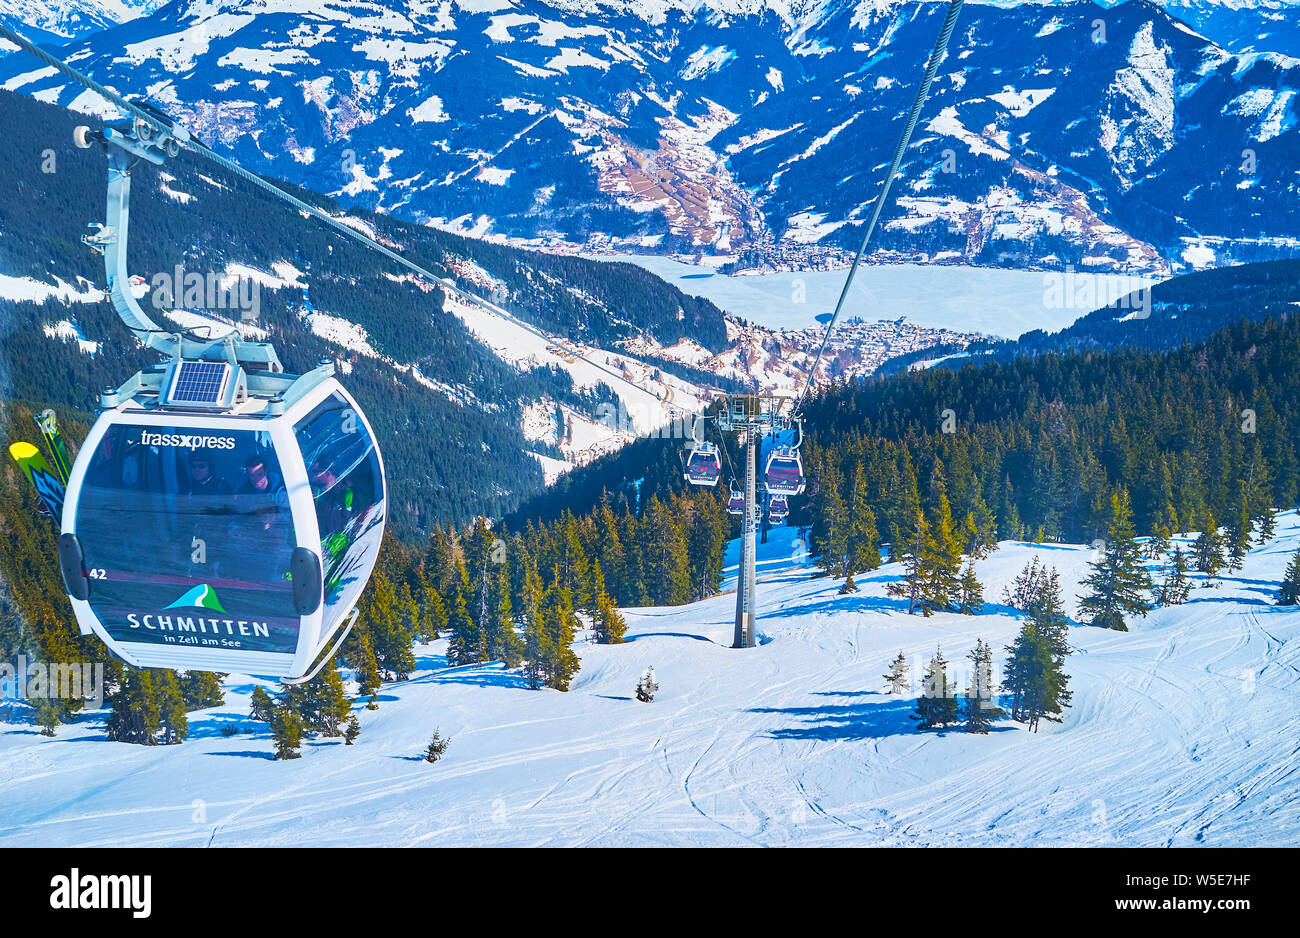 ZELL AM SEE, AUSTRIA - FEBRUARY 28, 2019: Enjoy the Schmitten Trassxpress ride from the top of Schmittenhohe mount to the valle of Zell am See resort Stock Photo